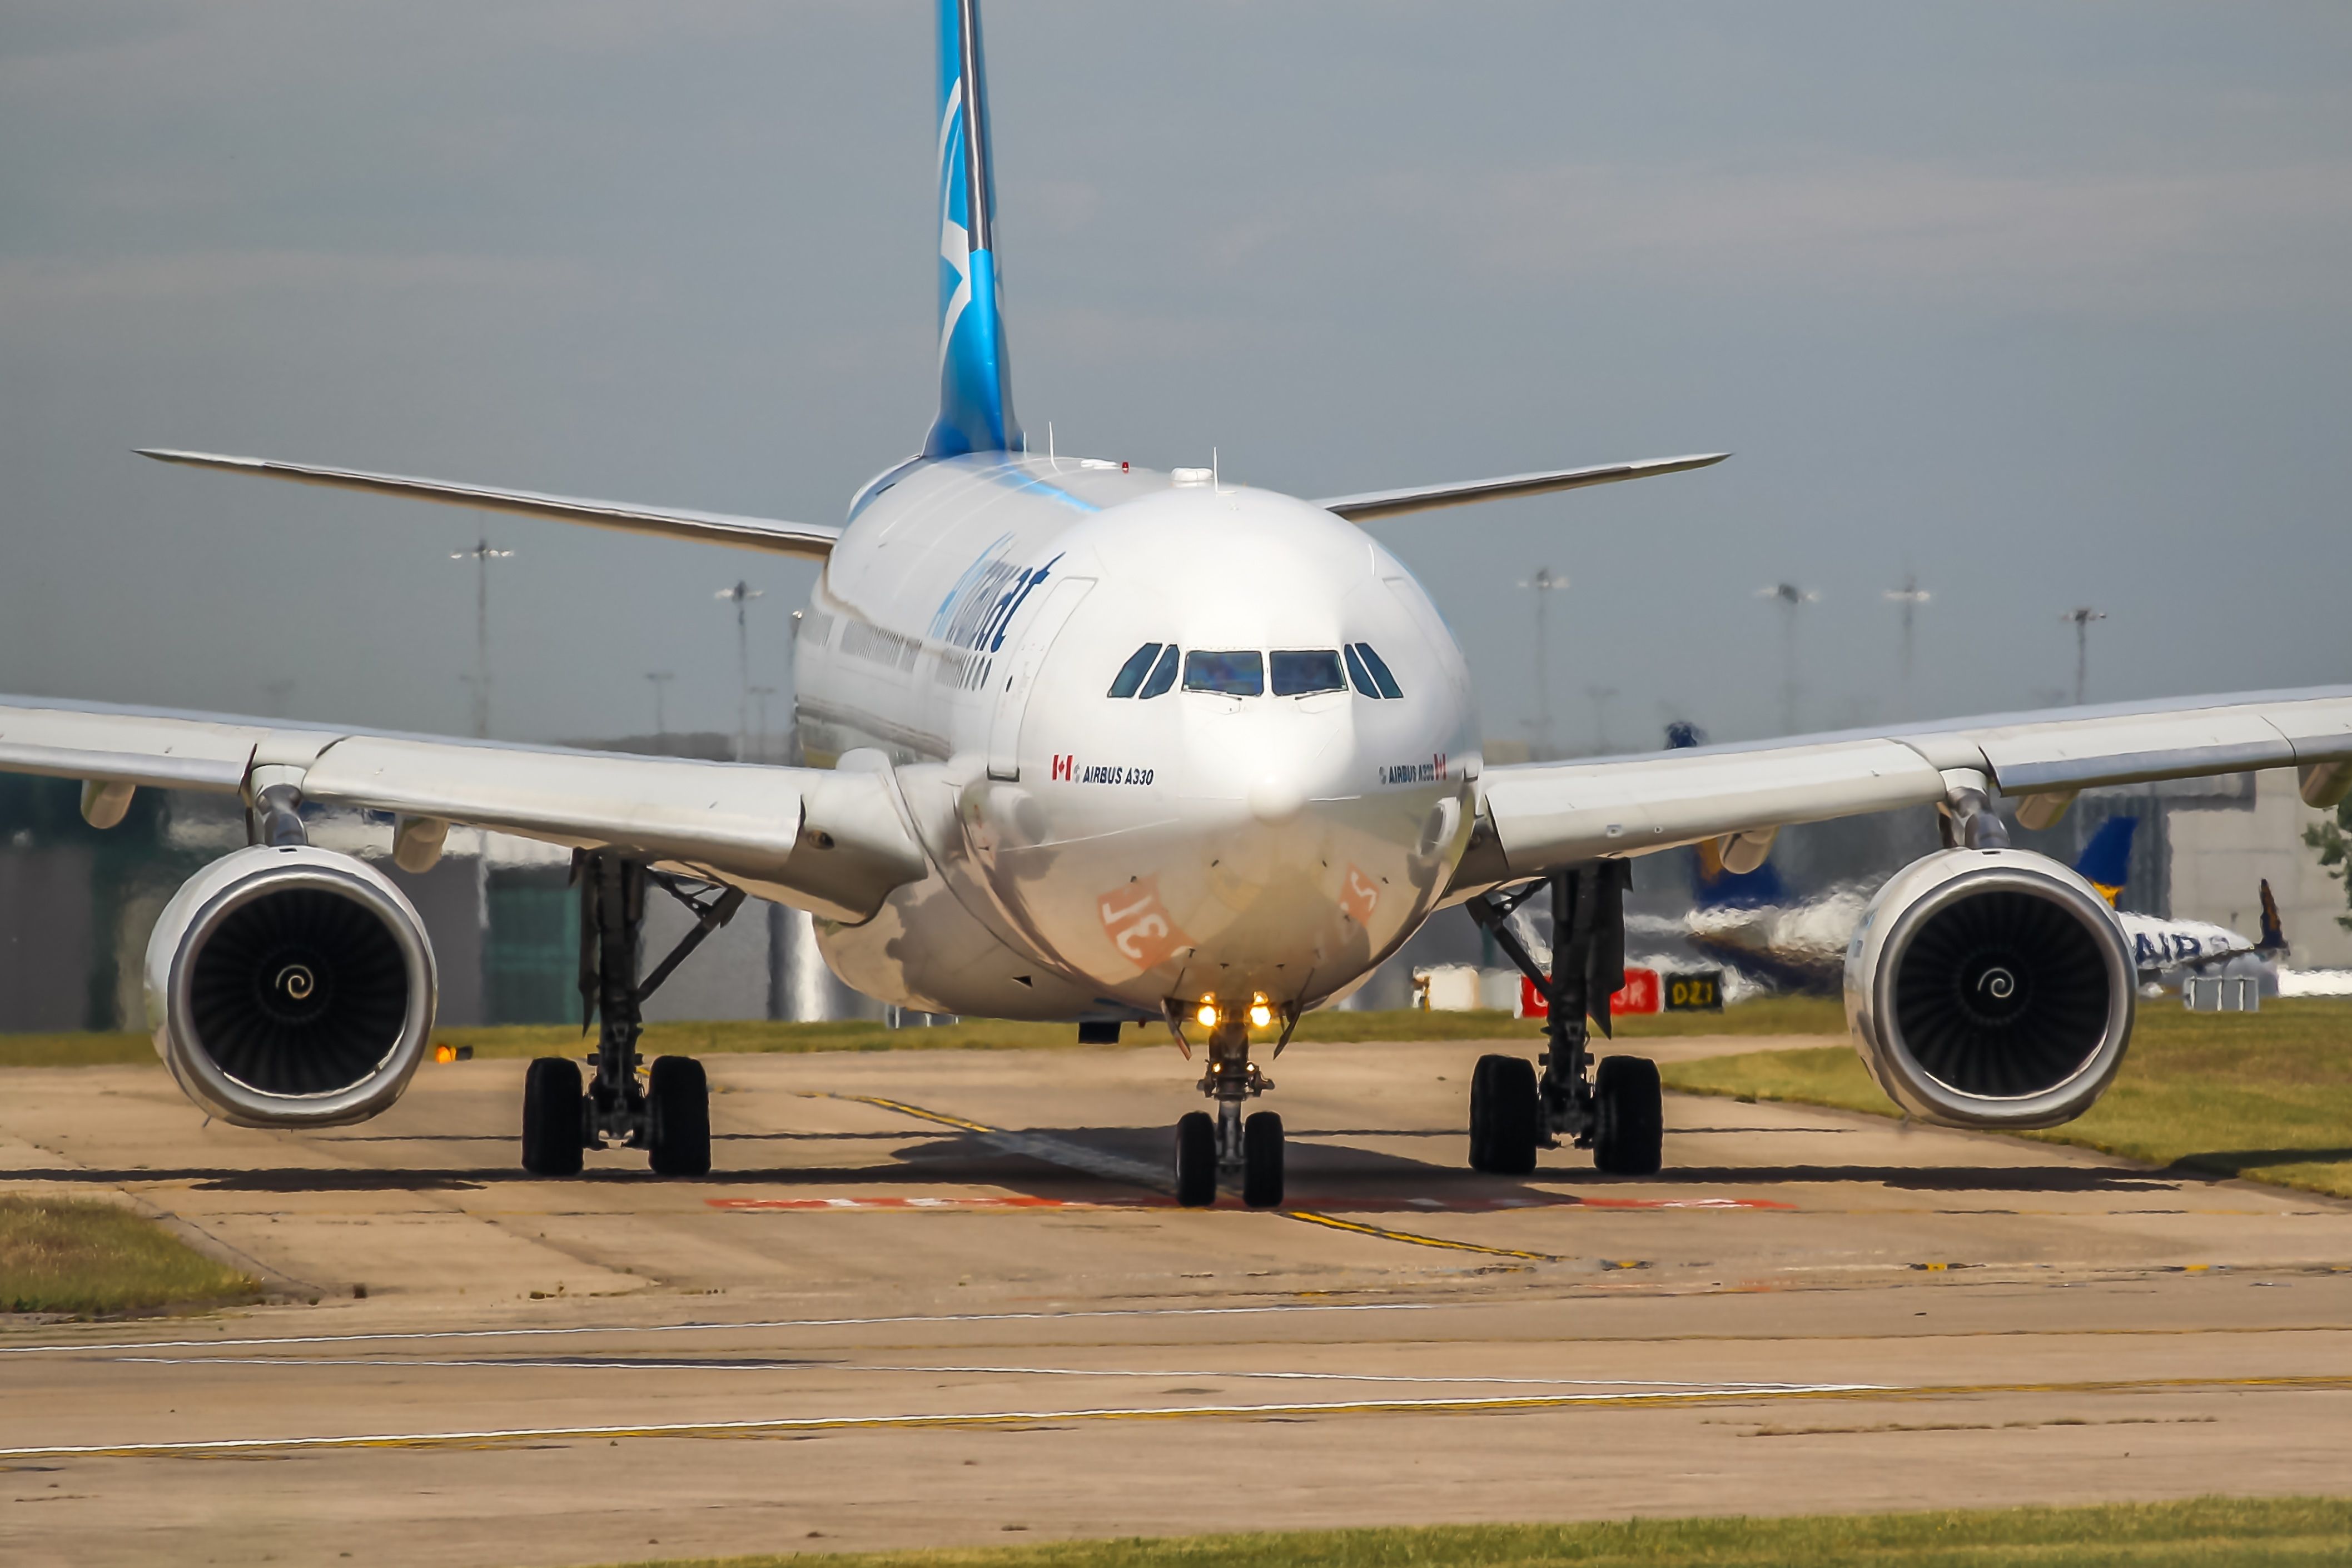 Air Transat Airbus A320 on the runway at Manchester Airport